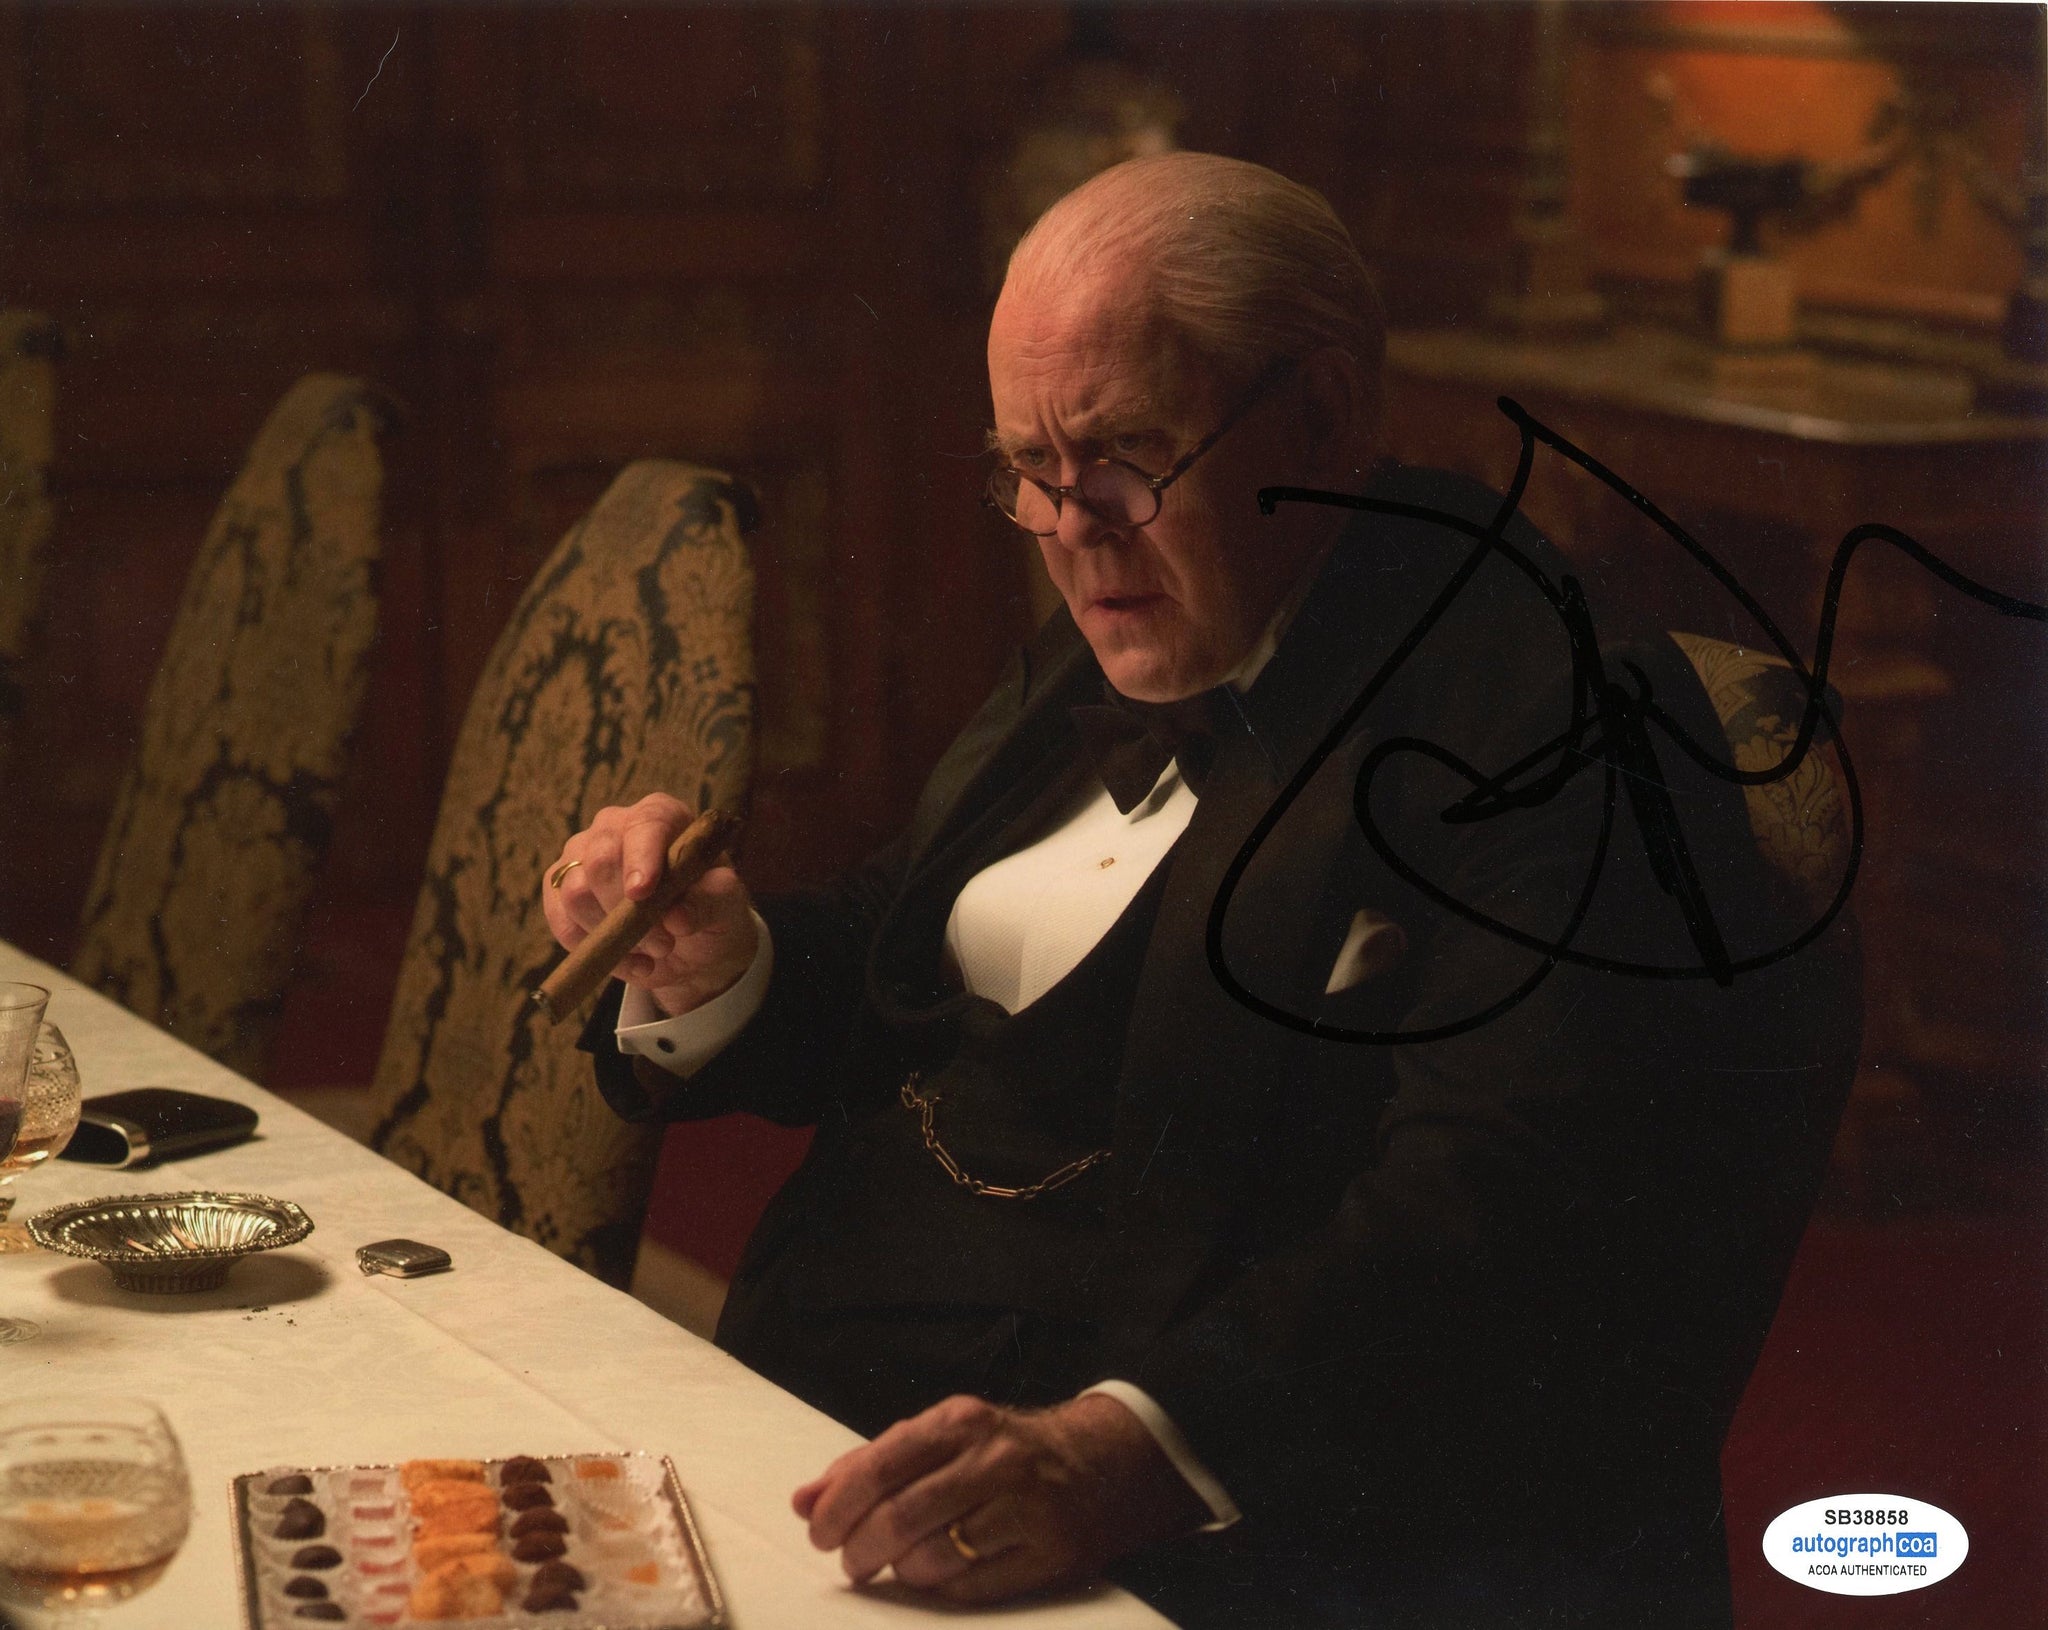 John Lithgow The Crown Signed Autograph 8x10 Photo ACOA